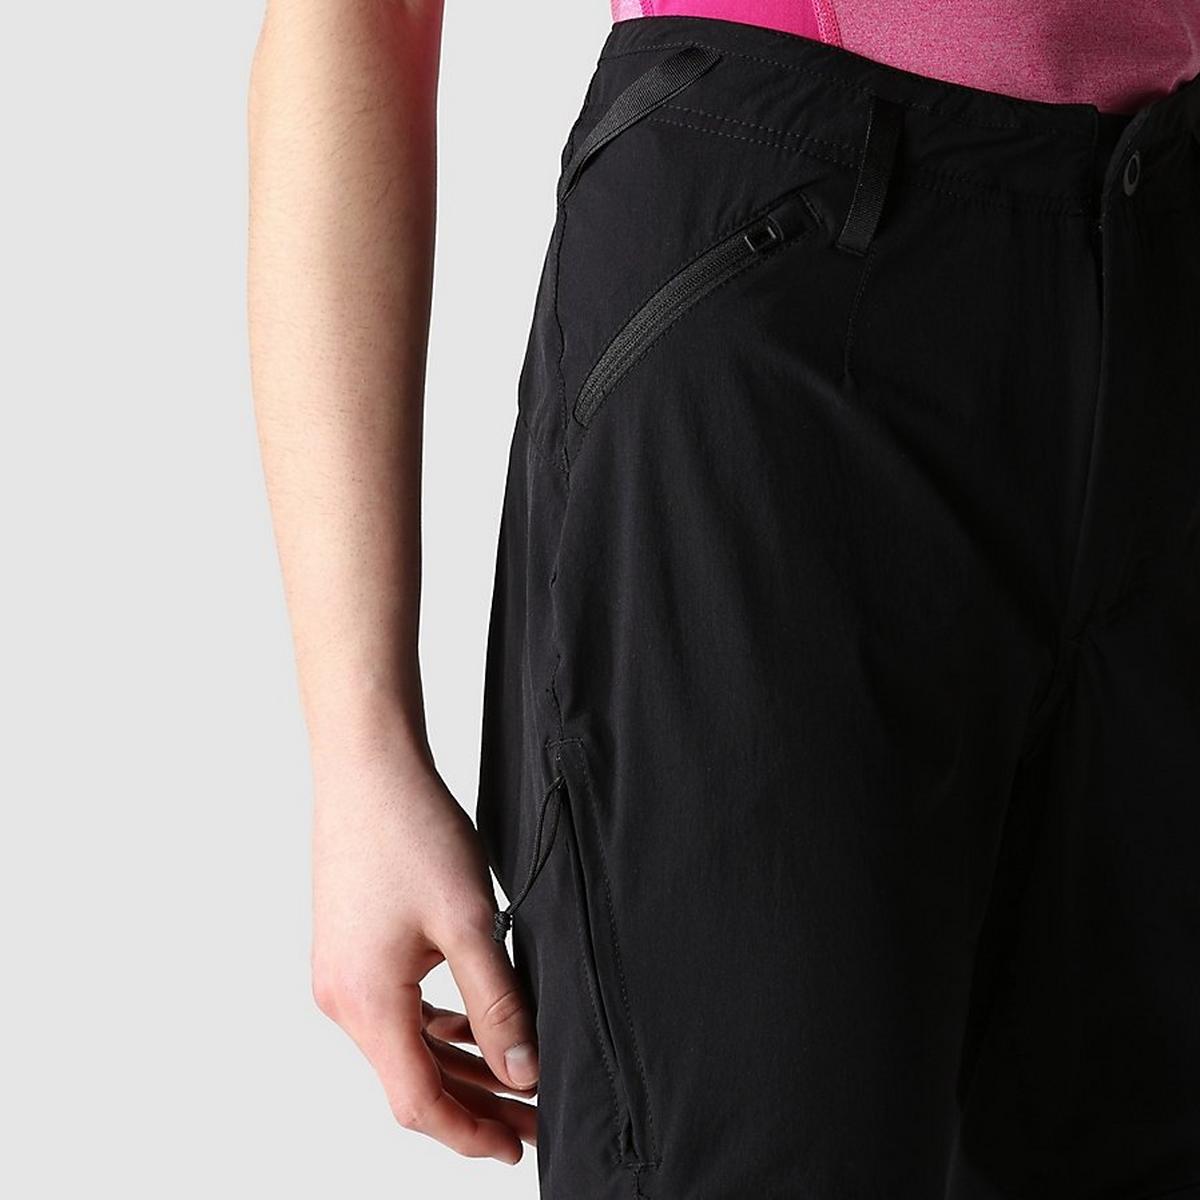 The North Face Speedlight Slim Straight Pant - Walking trousers Women's, Buy online